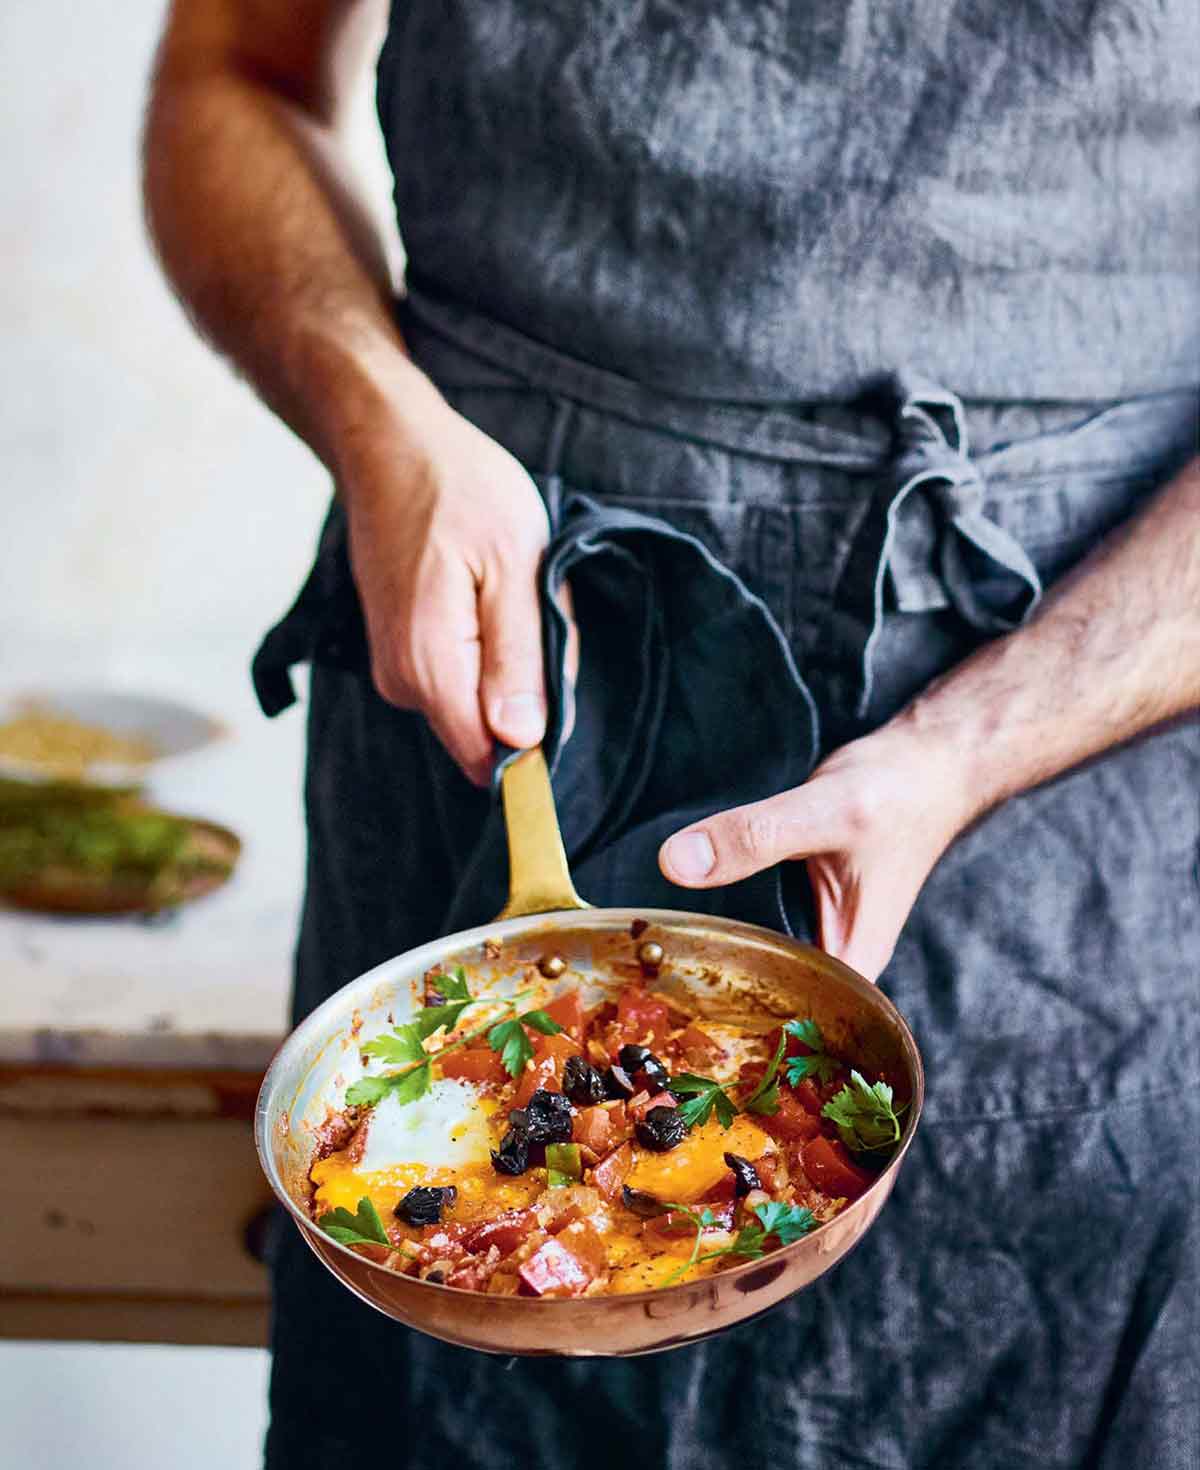 A person holding a skillet with jazmaz, or Syrian shakshuka - eggs cooked in a tomato and chile sauce.